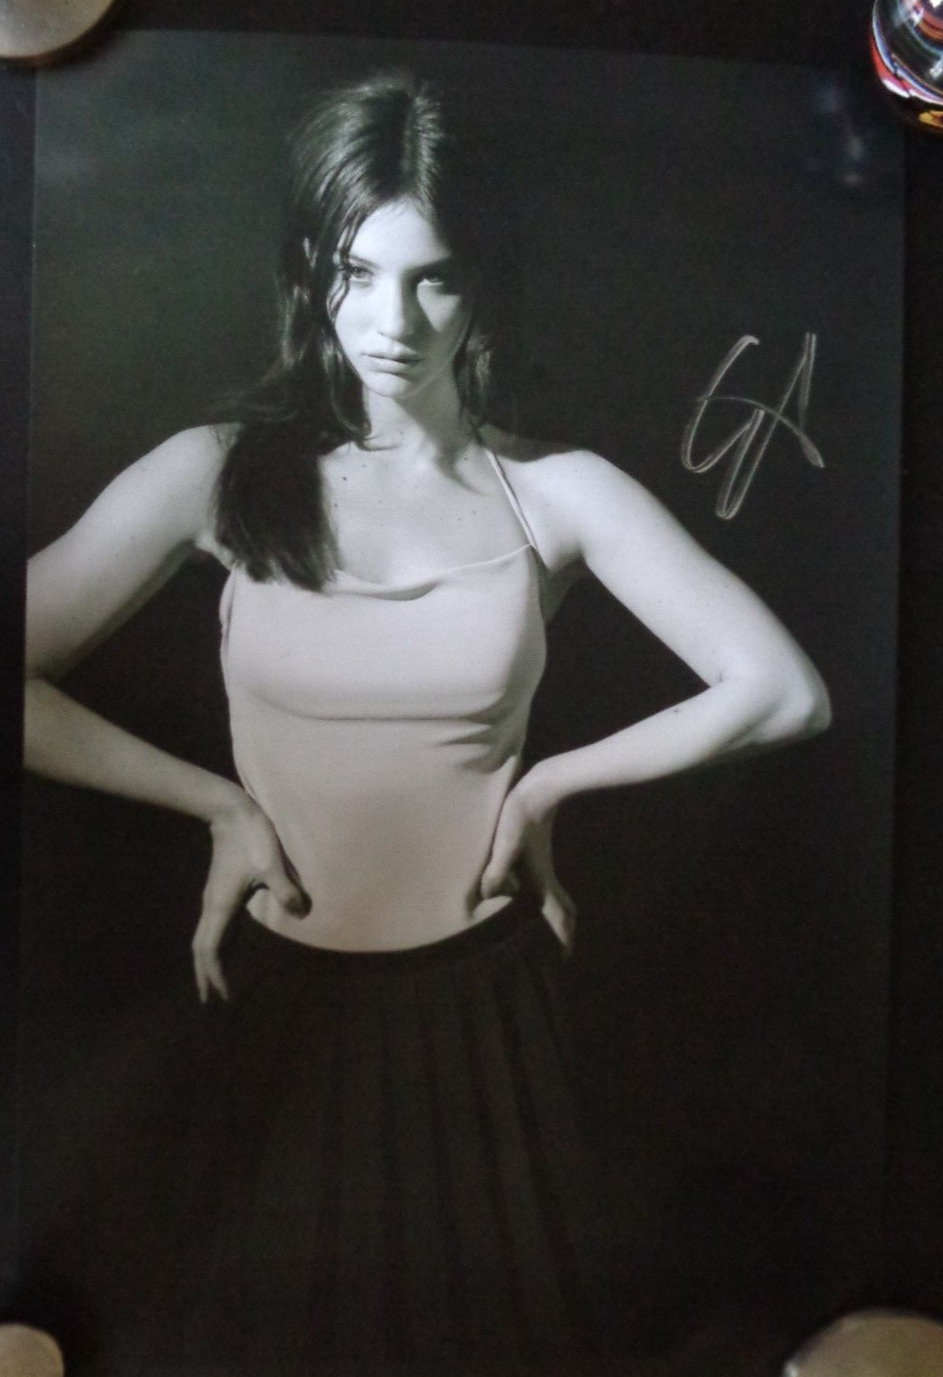 SIGNED GRACIE ABRAMS SIGNED /AUTOGRAPH GOOD RIDDANCE PROMOTIONAL POSTER